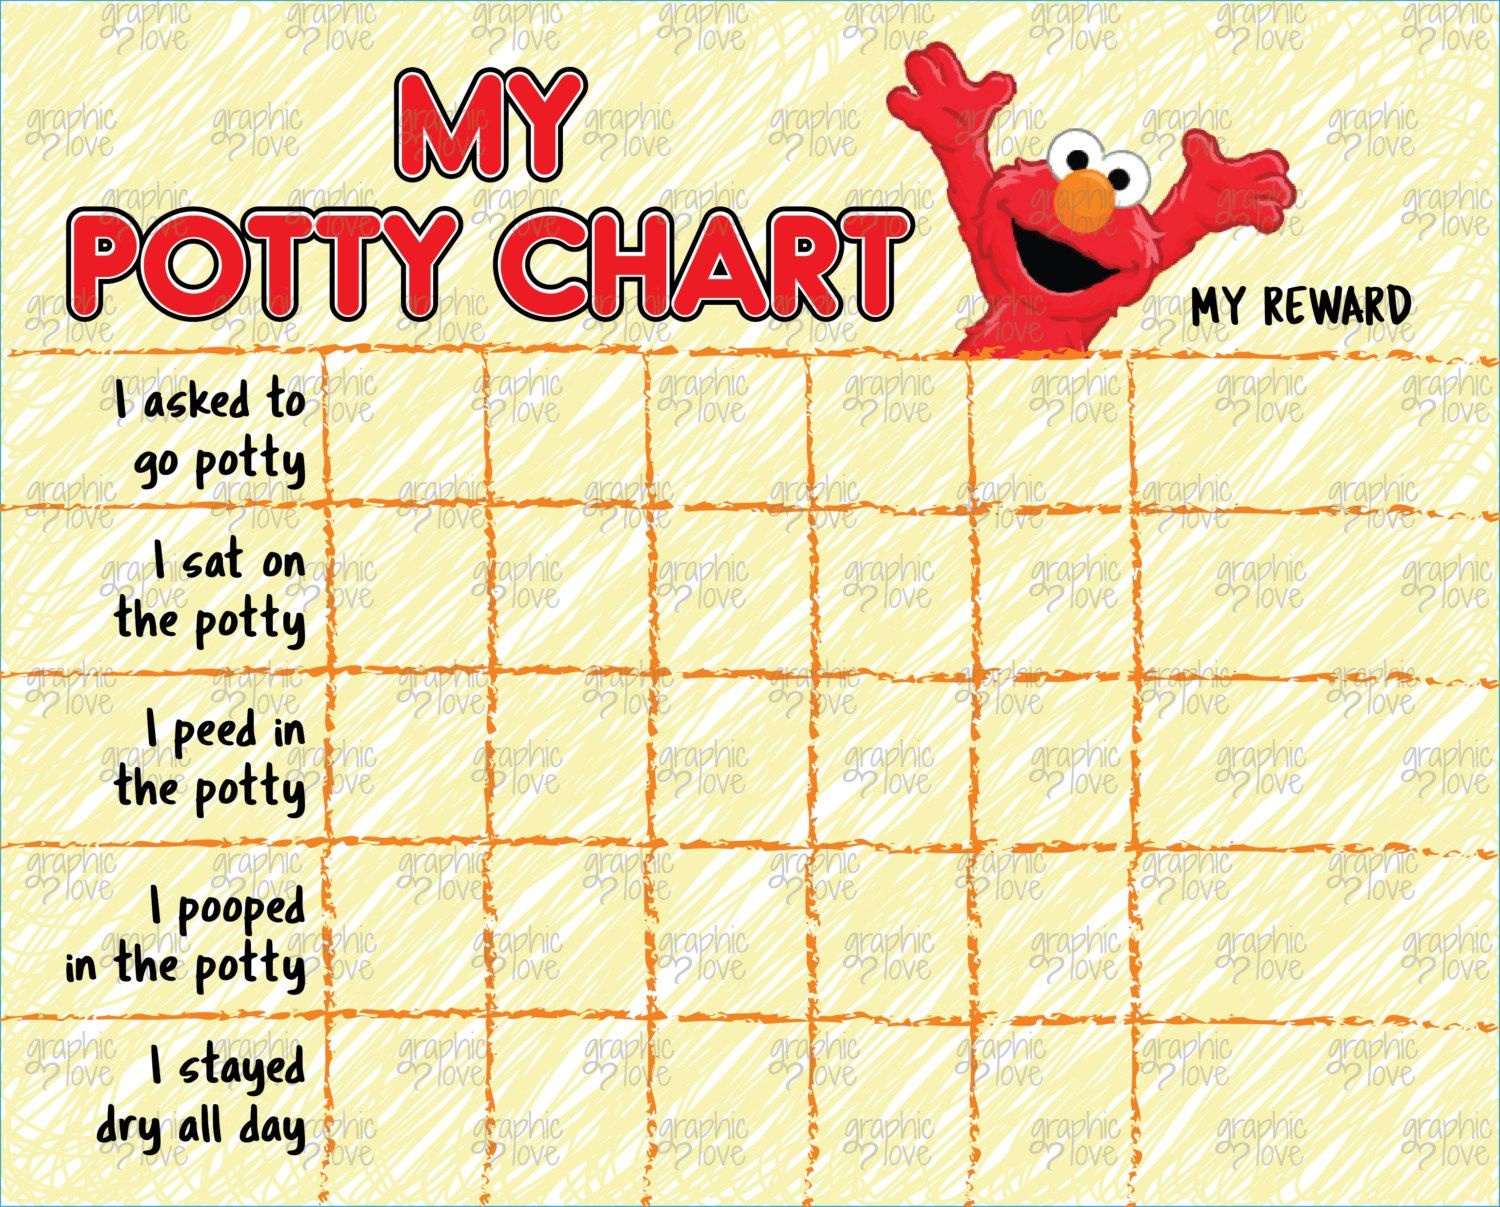 Elmo Inspired Potty Training Chart, Free Punch Cards | Elmo's World - Free Printable Minnie Mouse Potty Training Chart